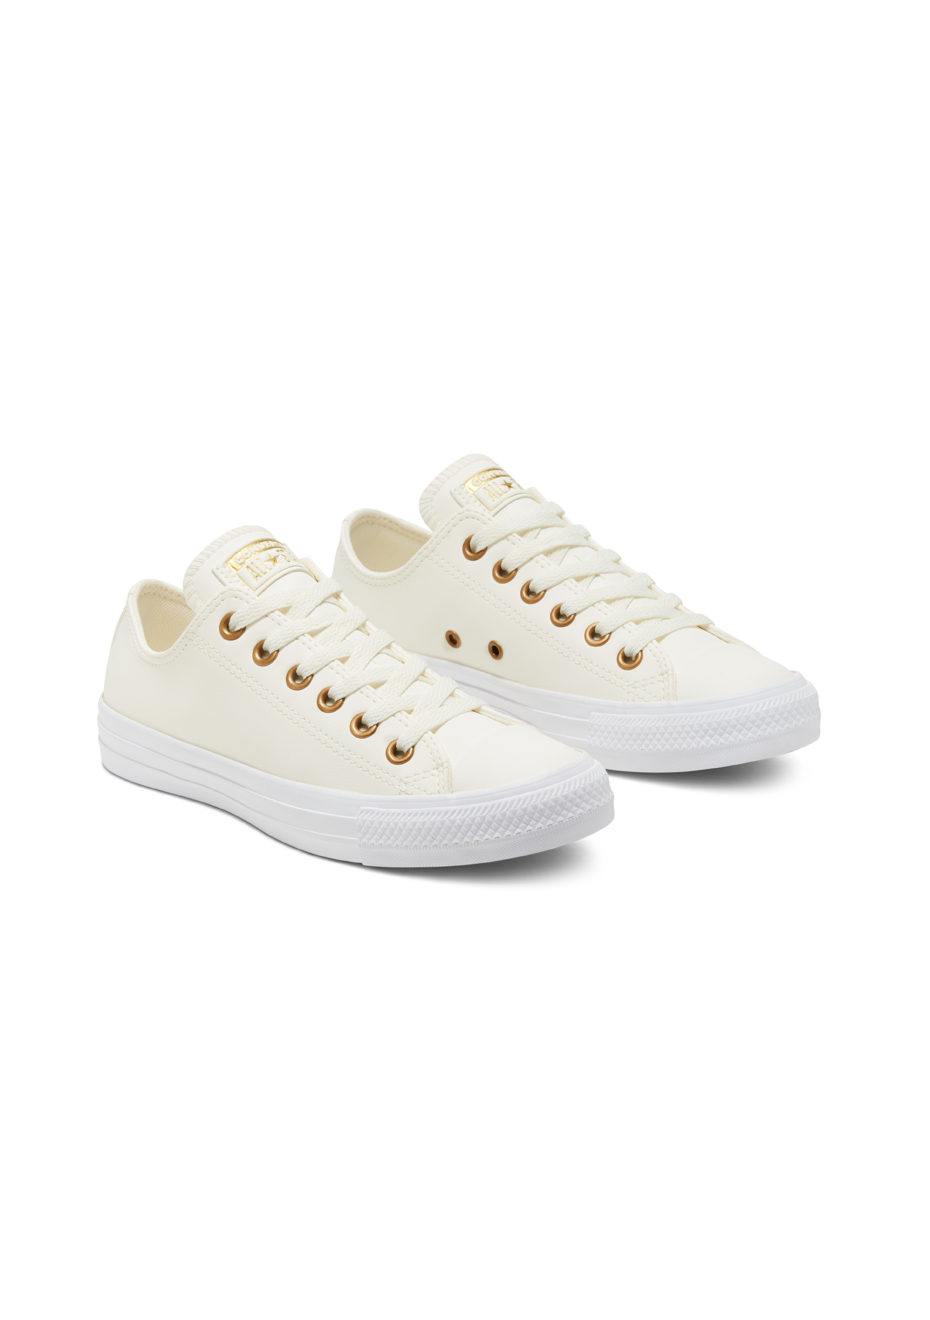 converse all star low leather powder blue rose gold